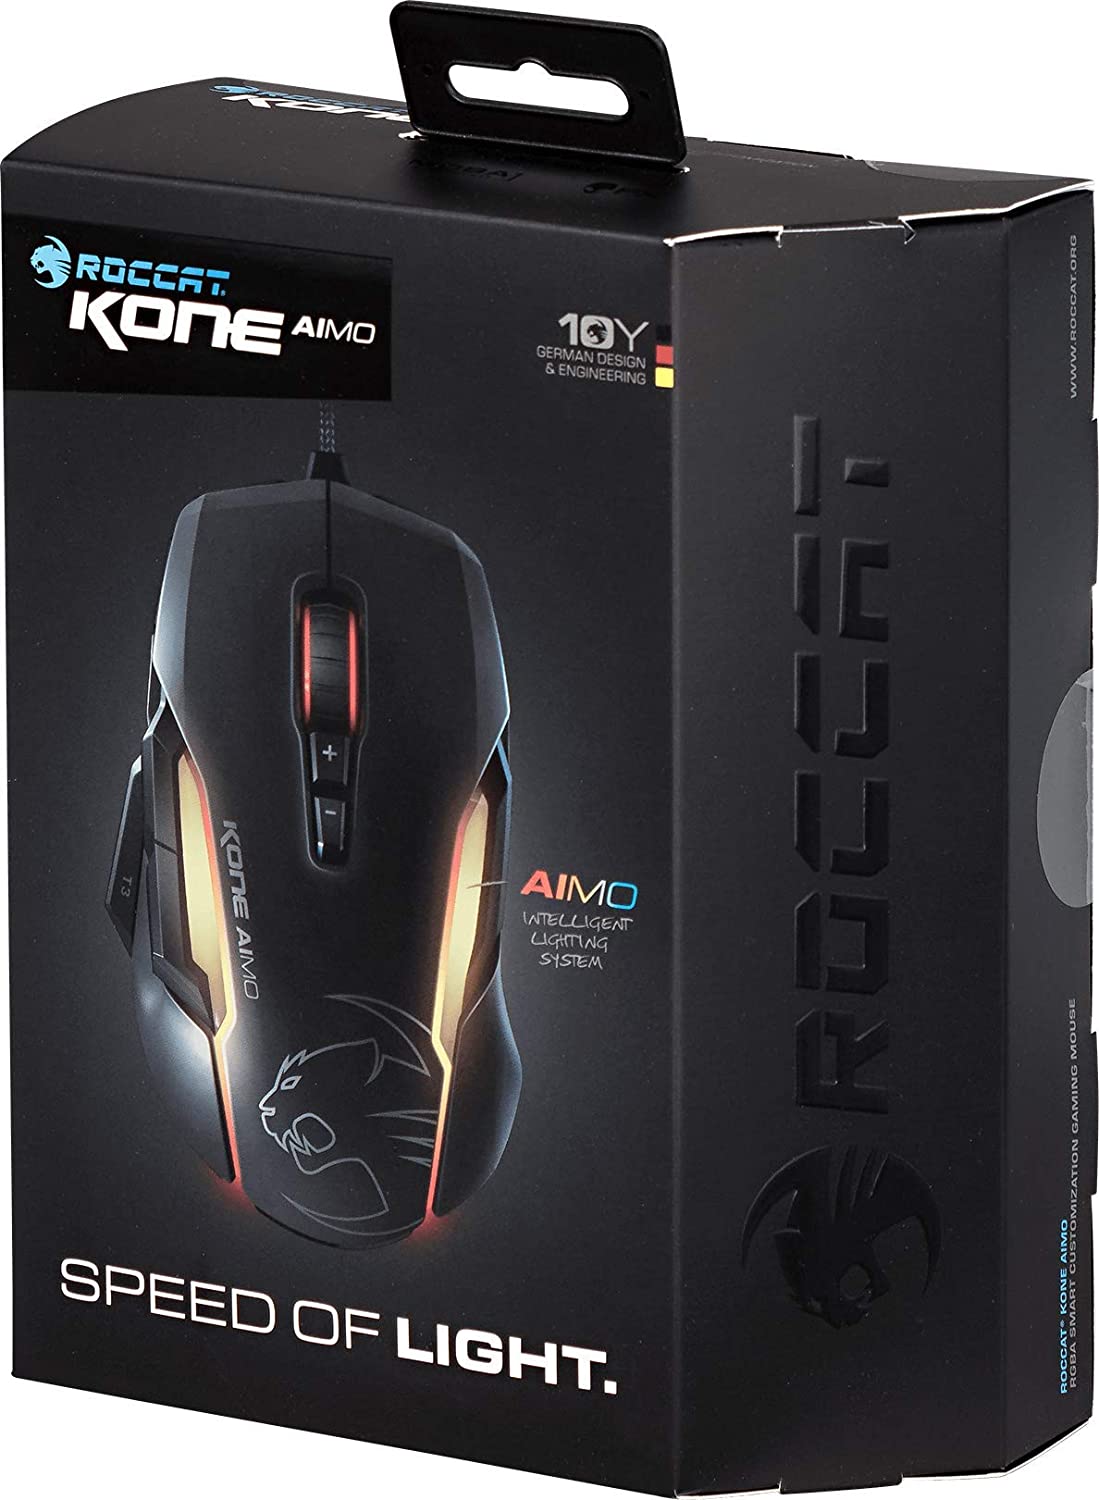 71Qr9Iq65Hl. Ac Sl1500 Roccat Https://Youtu.be/Mfk3Bmiiu8C Roccat® Swarm Powered – Comprehensive Driver Suite With A Striking Design And A Stunning Feature Set, The Kone Aimo Channels The Legacy Of Its Predecessor. It Boasts Refined Ergonomics With Enhanced Button Distinction, But What Truly Sets It Apart Is Its Rgba Double Lightguides Powered By The State-Of-The-Art Aimo Intelligent Lighting System. Aimo Is The Vivid Illumination Eco-System From Roccat®. Its Functionality Grows Exponentially Based On The Number Of Aimo-Enabled Devices Connected. It Also Reacts Intuitively And Organically To Your Computing Behavior. Eliminating The Need For Configuration, It Presents A State-Of-The-Art Lighting Scenario Right Out Of The Box, For A Completely Fluid, Next-Gen Experience. The Kone Aimo Features A Tri-Button Thumb Zone For A New And Even Greater Level Of Control. It Includes Two Wide Buttons Suitable For All Hand Sizes, Plus An Ergonomic Lower Button Set To Easy-Shift[+]™ By Default. Easy-Shift[+]™ Is The World-Famous Button Duplicator Technology That Lets You Assign A Secondary Function To The Mouse'S Buttons. It'S Easy To Program And Has Options For Simple Commands And Complex Macros. Gaming Mouse Roccat - Kone Aimo Rgba Smart Customization Gaming Mouse (Black) 23 Programmable Keys, Designed In Germany